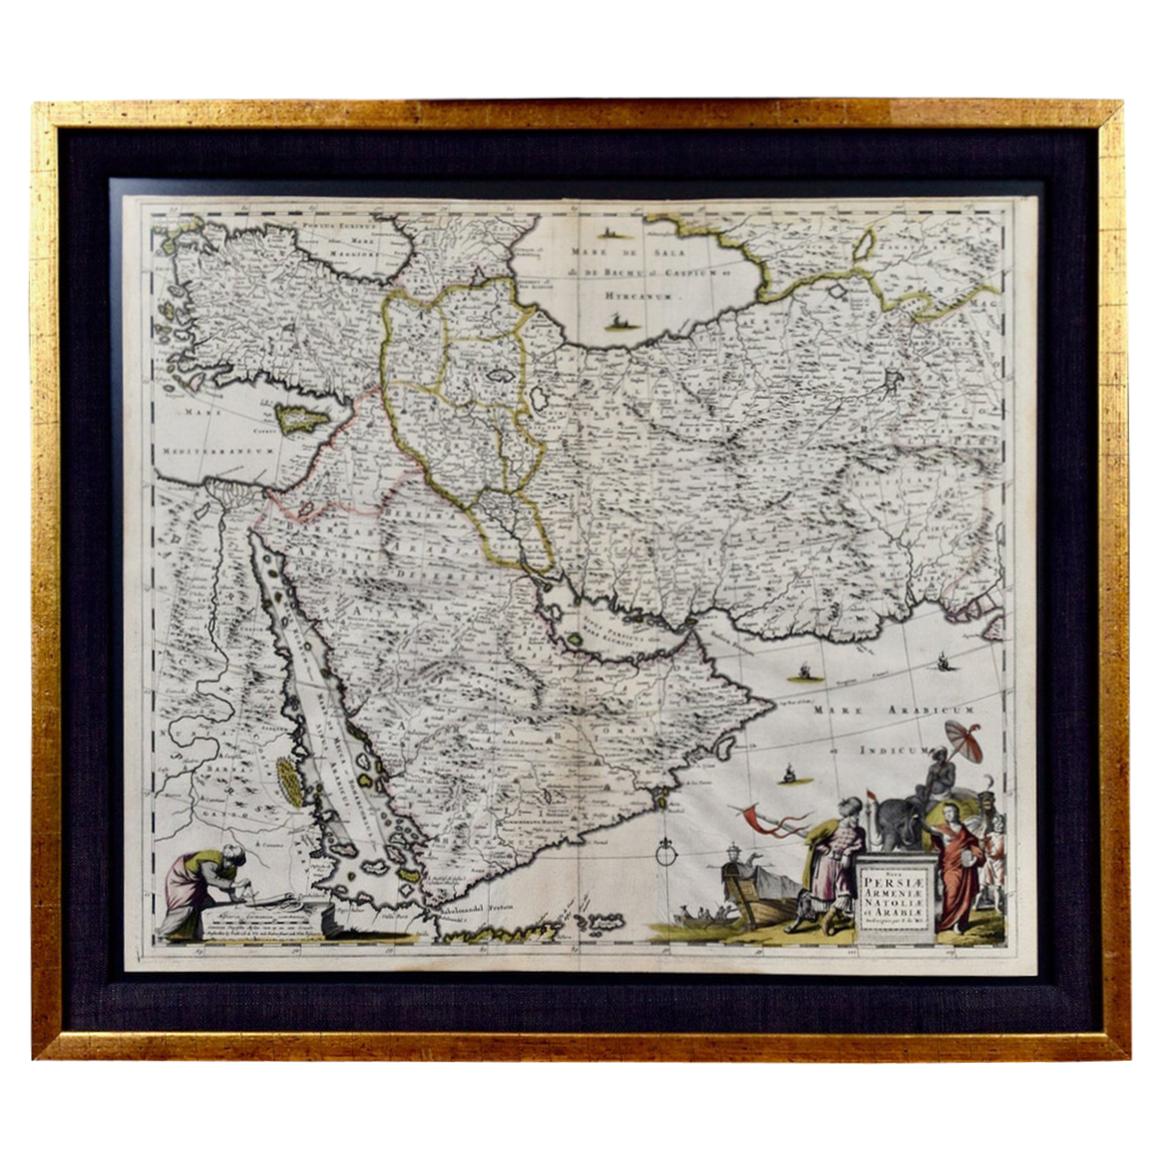 Persia, Armenia & Adjacent Regions: A 17th Century Hand-colored Map by De Wit For Sale